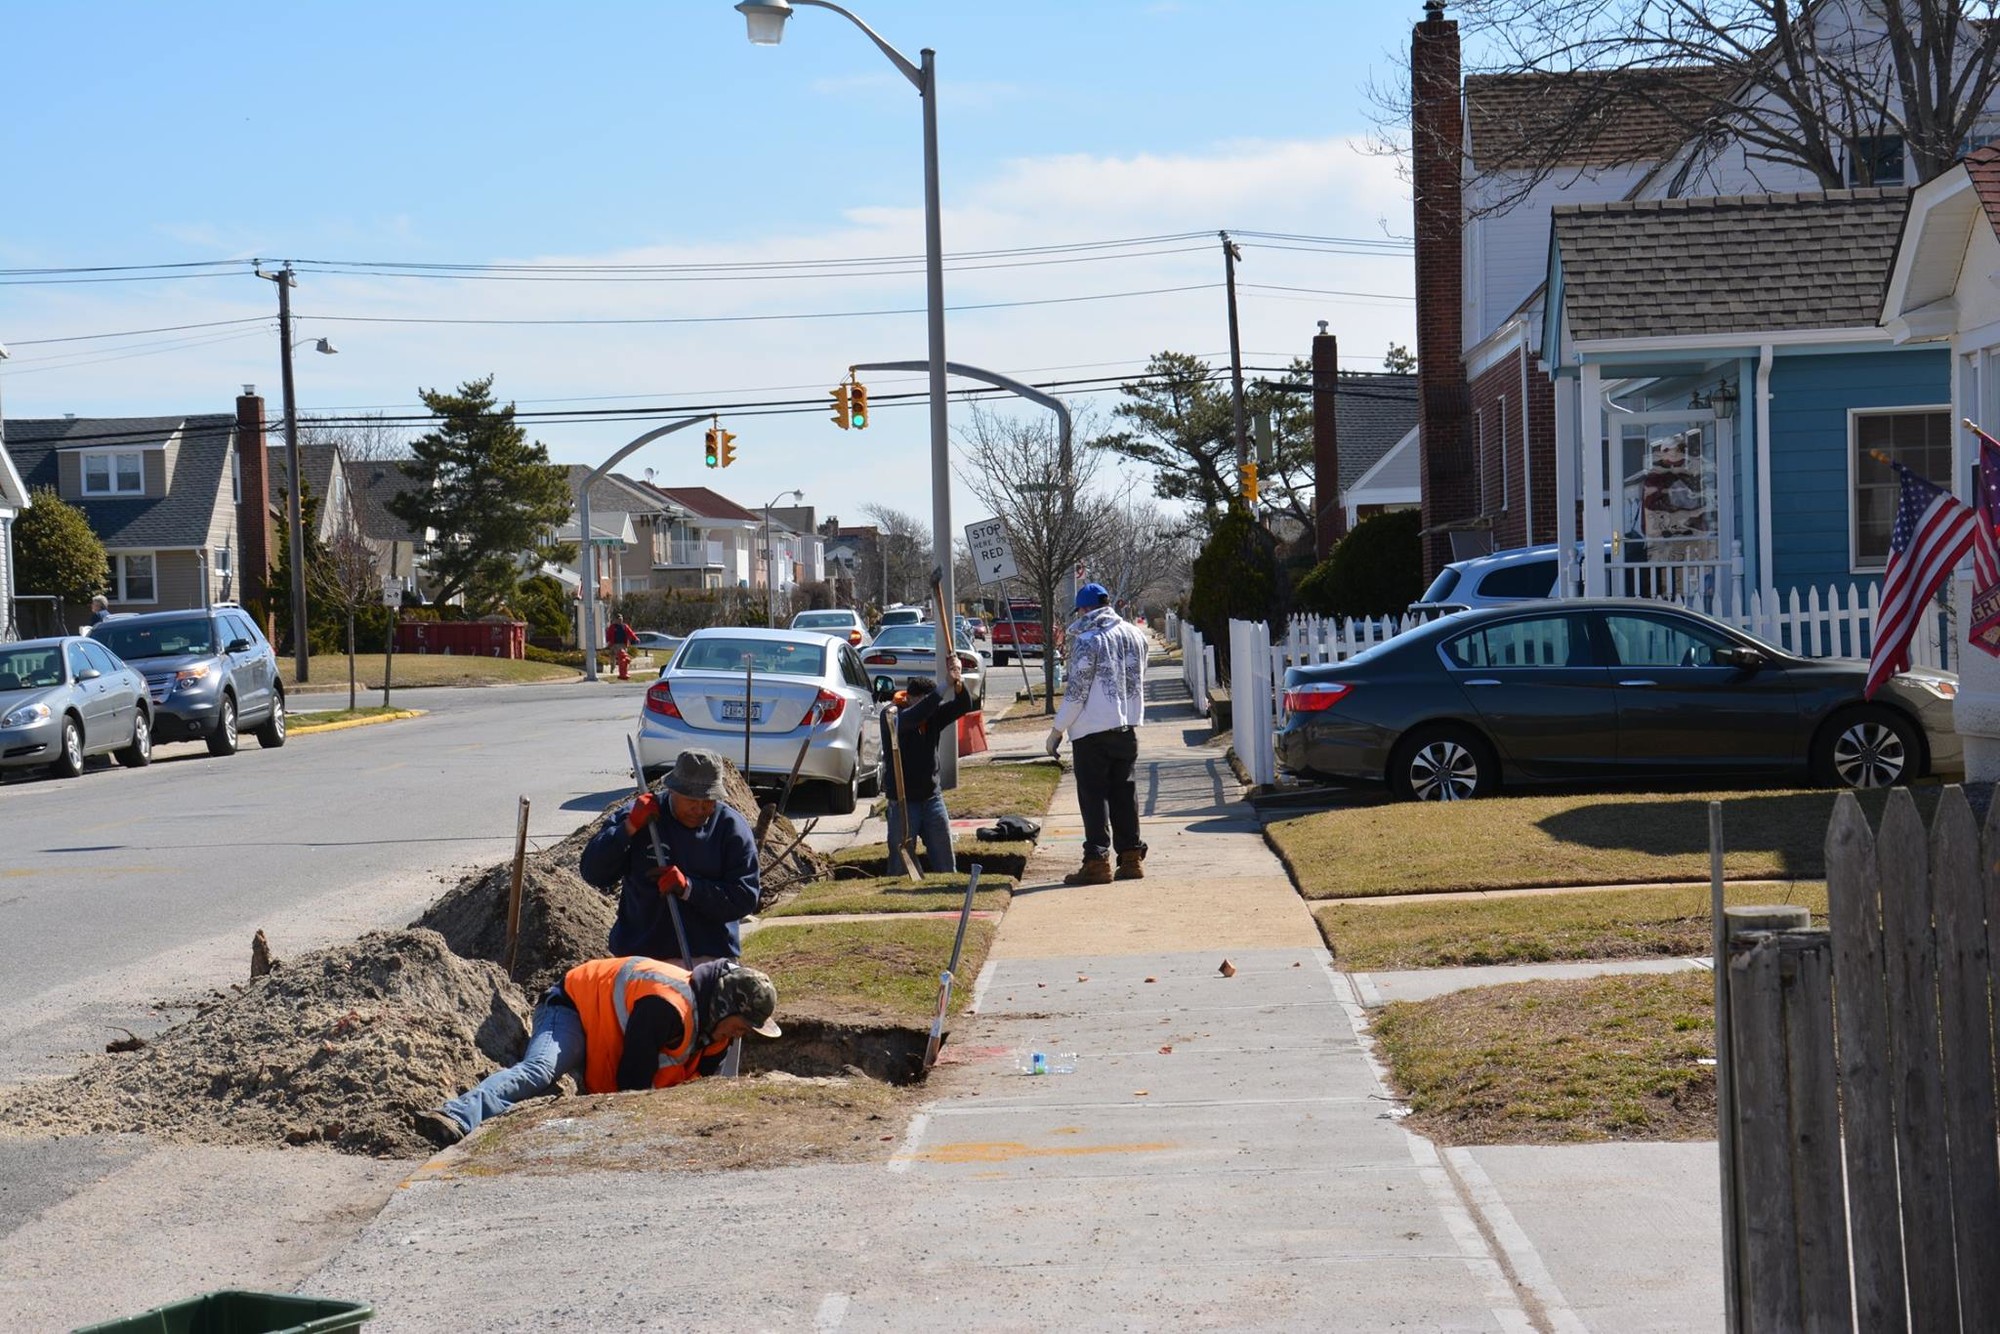 The city hired a landscaping firm on March 24 to begin the process of planting 2,700 trees throughout the city by June.